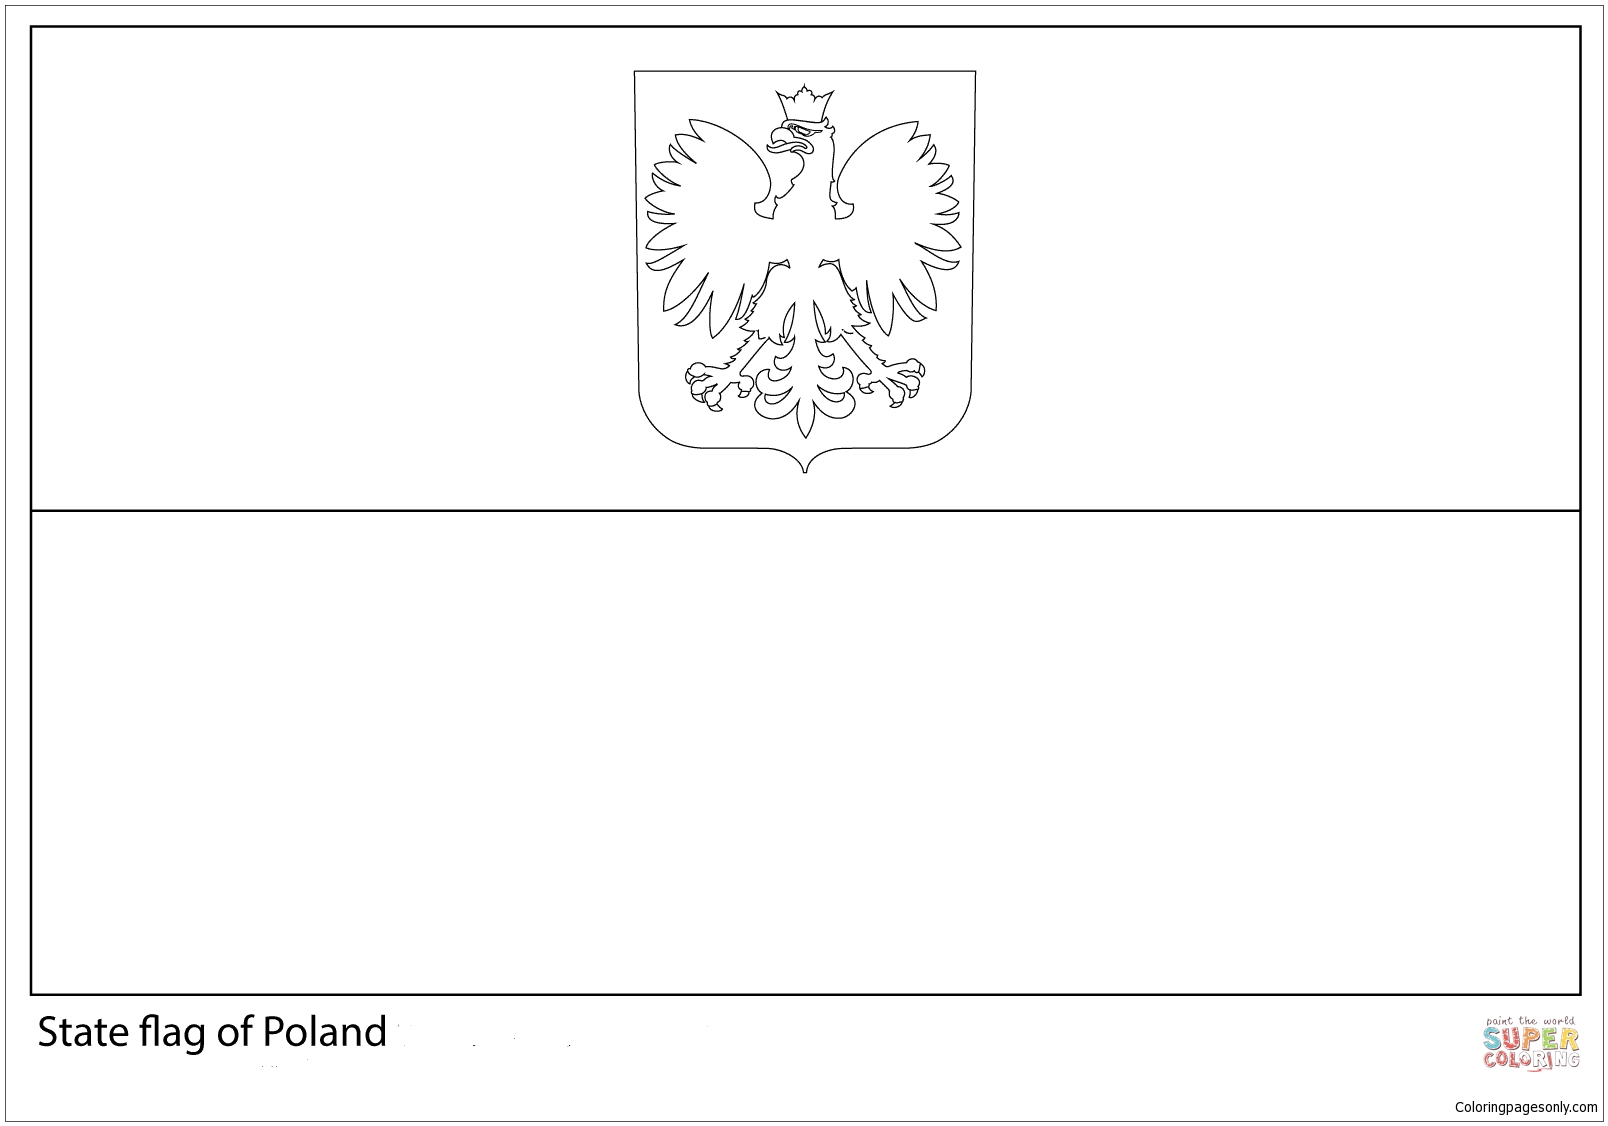 Download Flag of Poland-World Cup 2018 Coloring Page - Free Coloring Pages Online